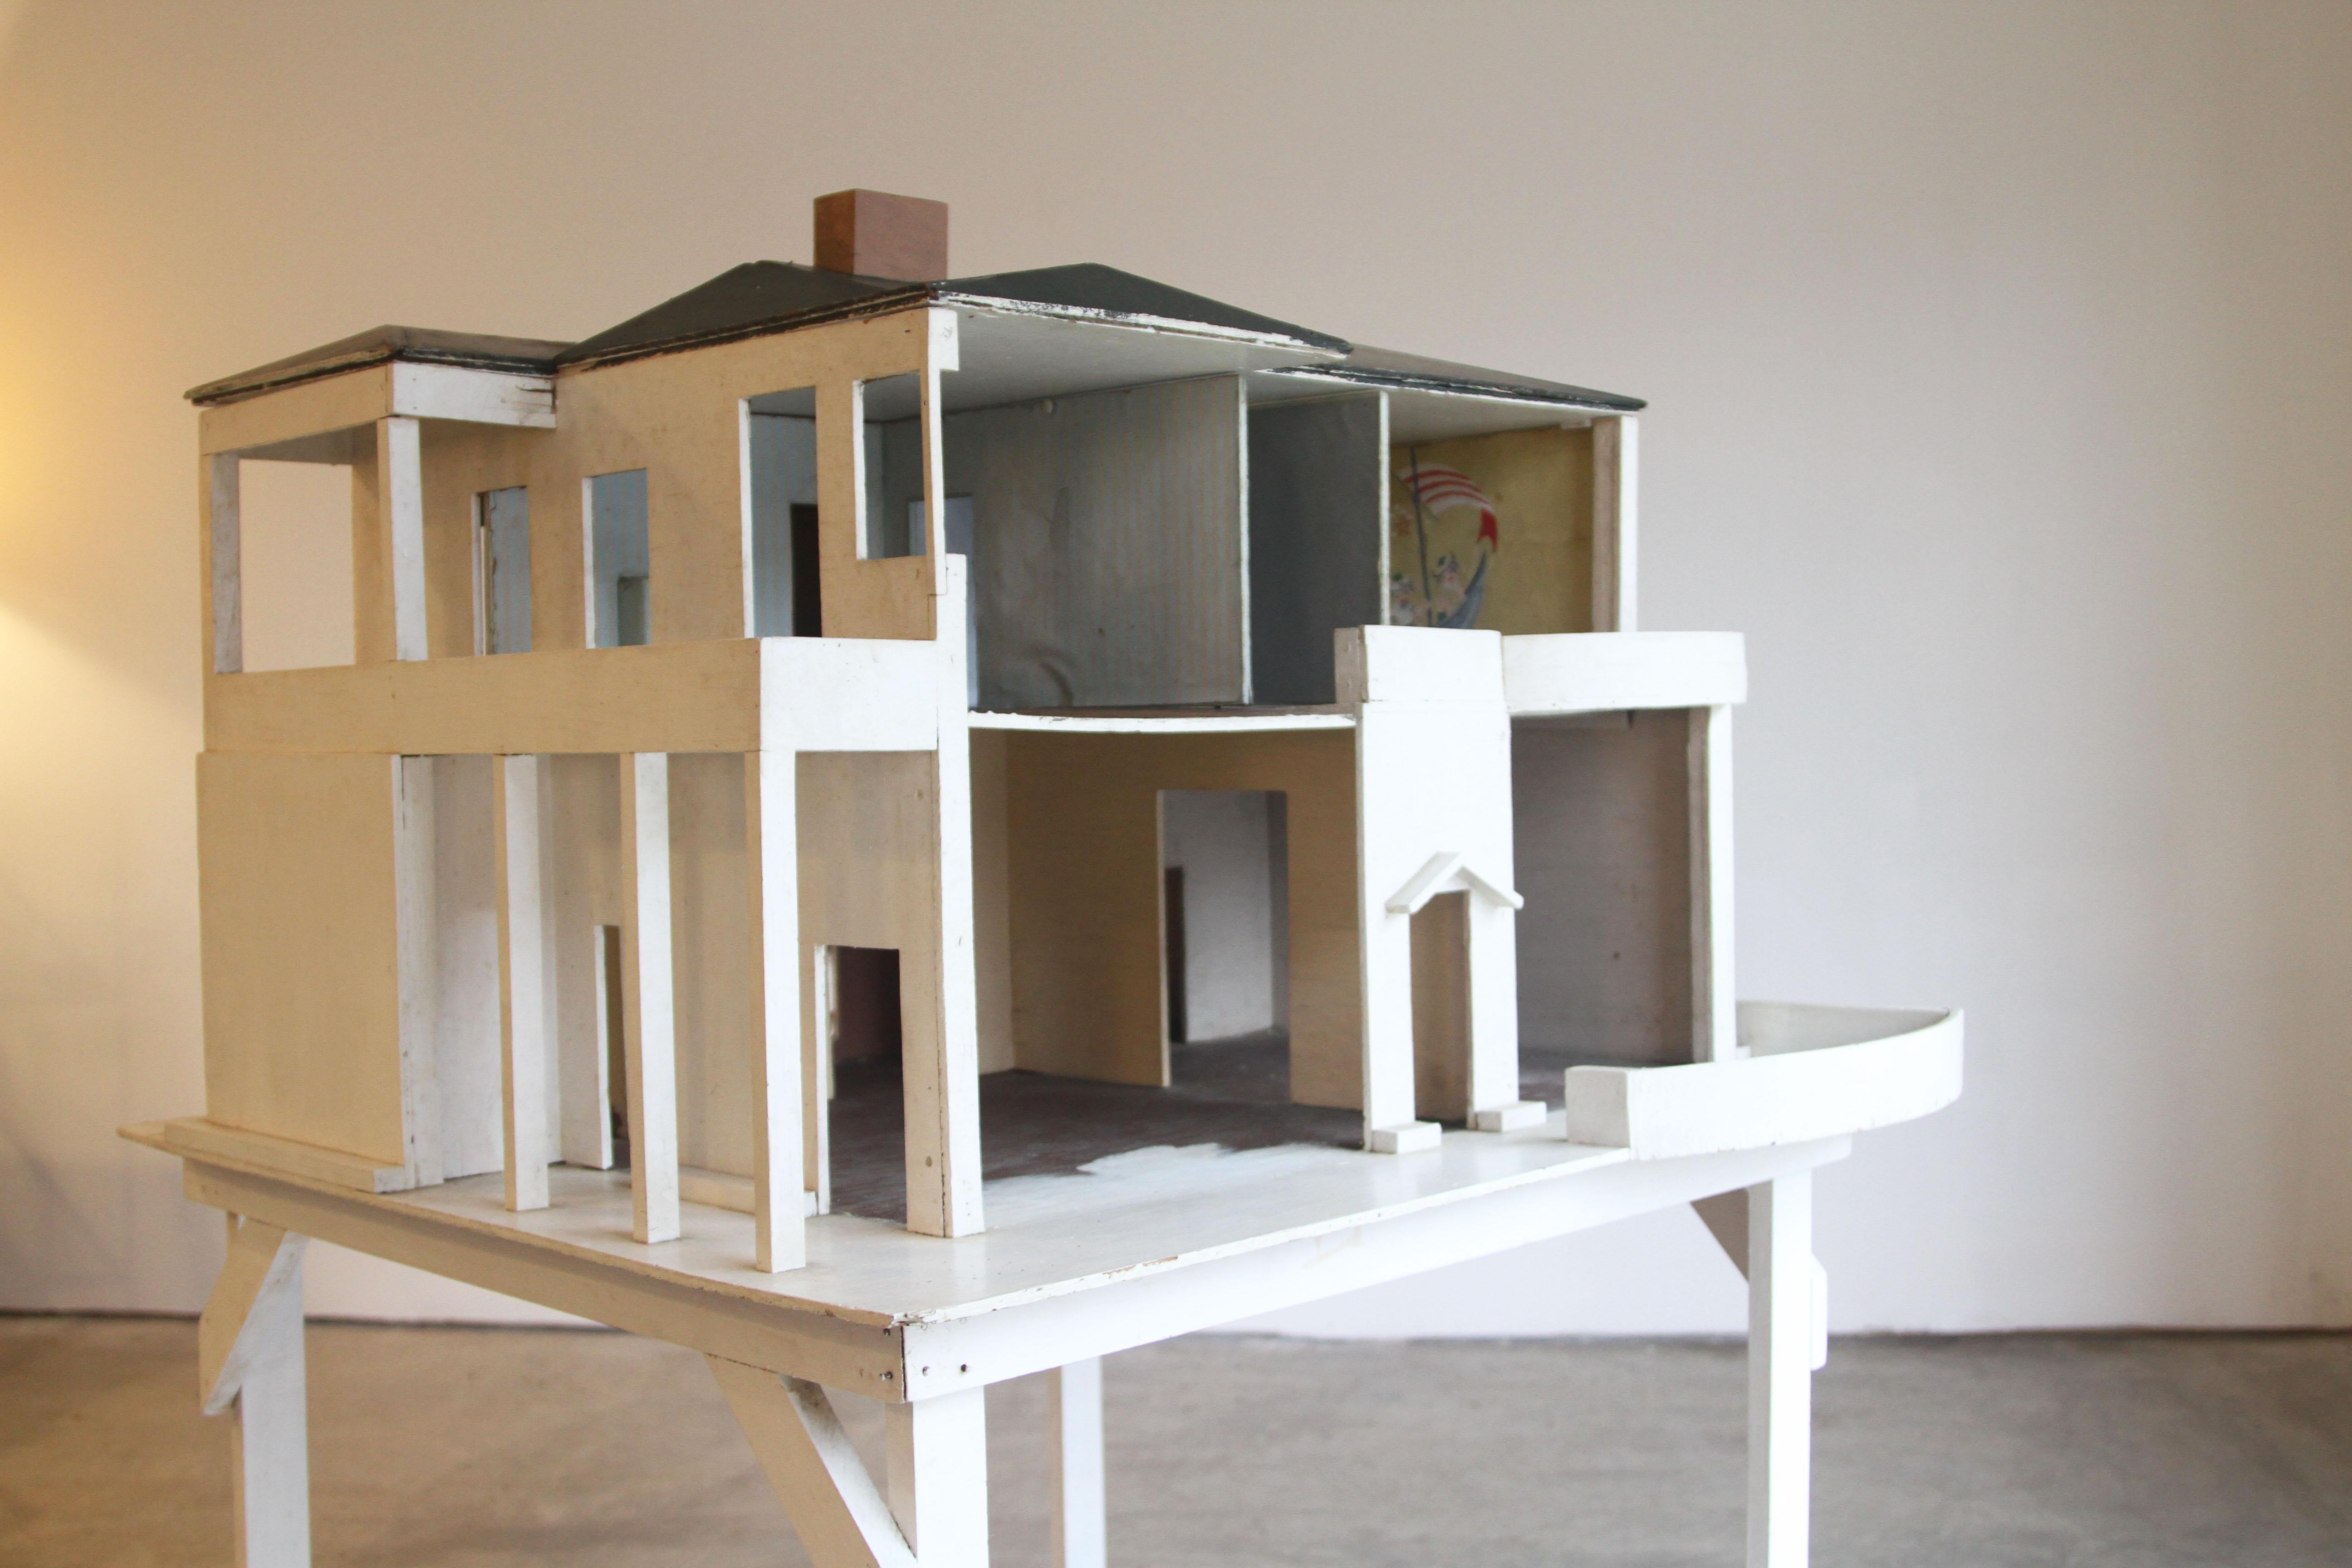 20th Century Architectural Eames House Model / Dollhouse